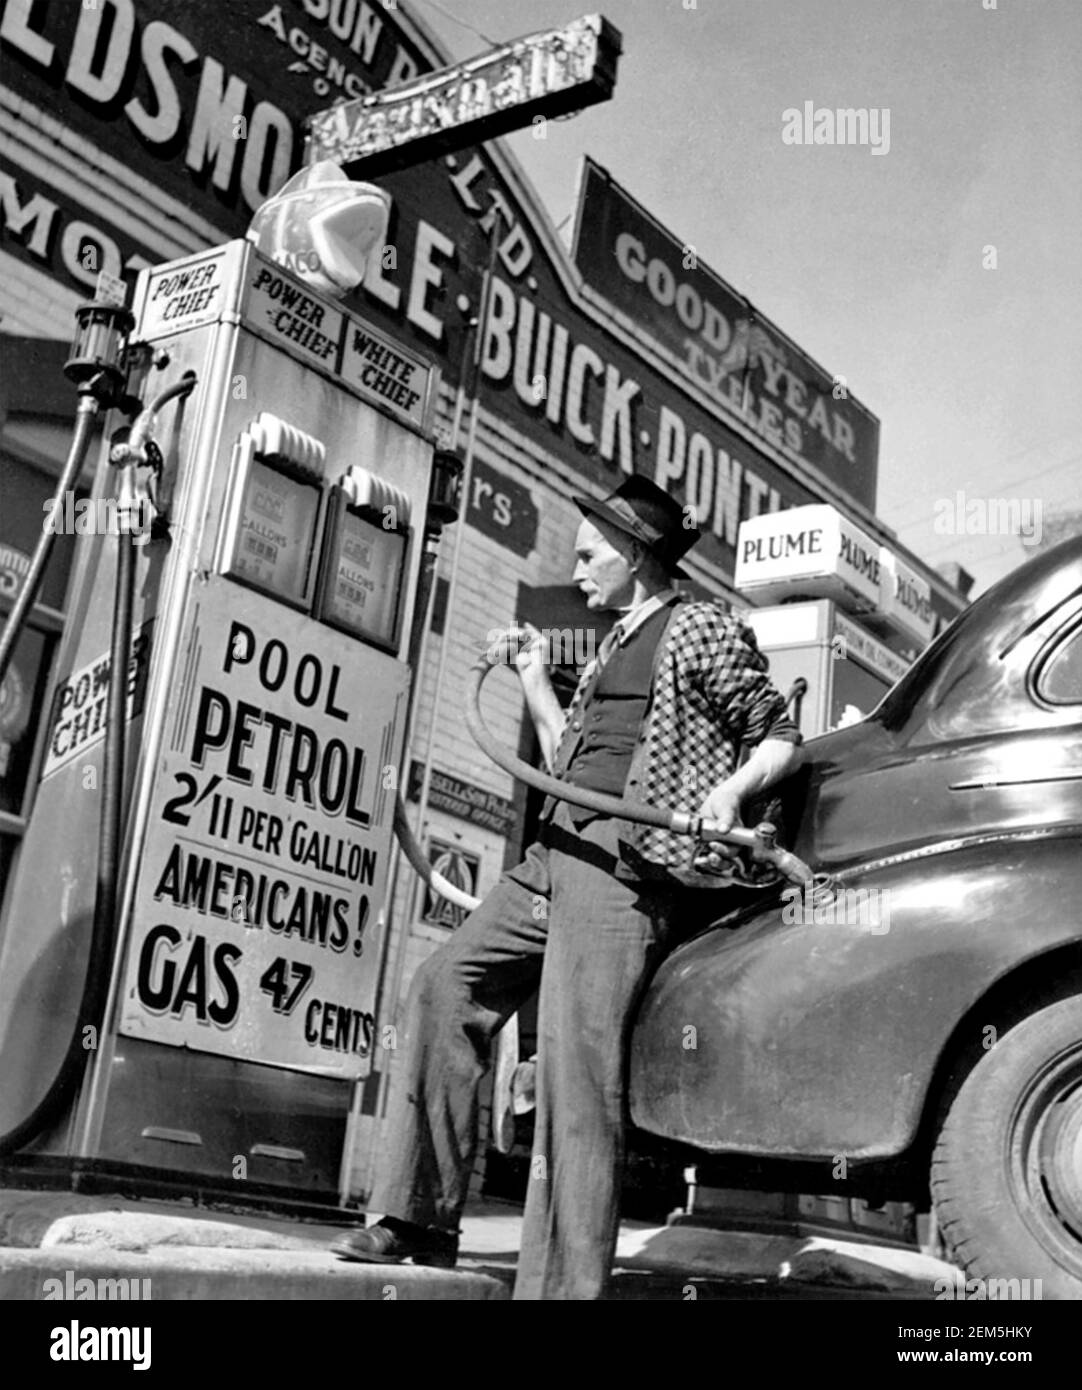 PETROL DOWN UNDER An enterprising garage owner in Drouin, Victoria, Australia, in 1944 displays his pricing in US currency. Stock Photo